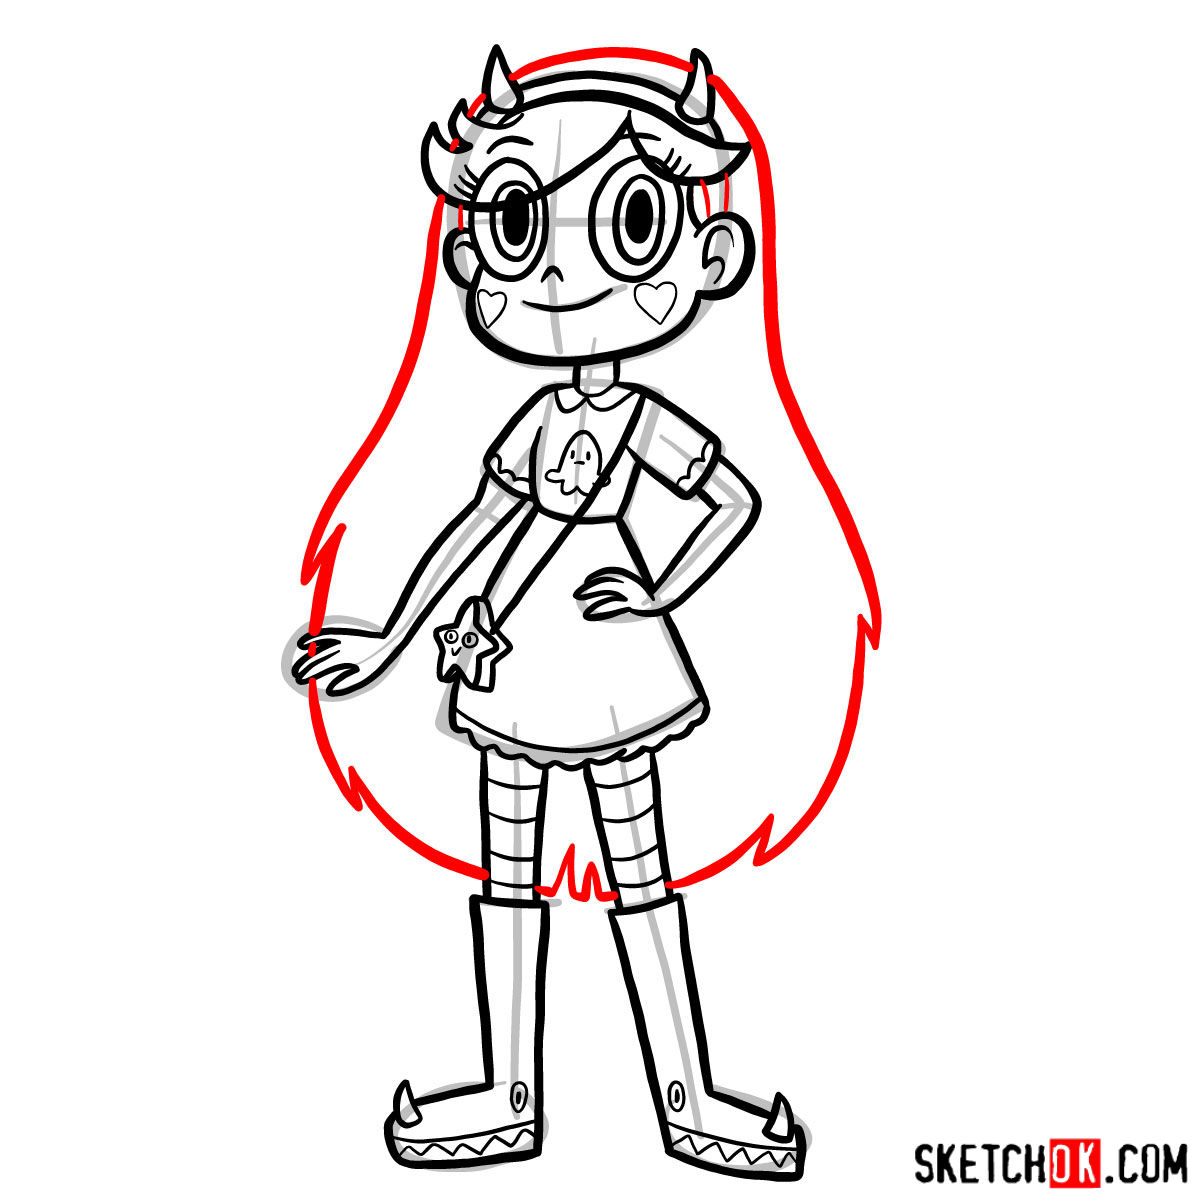 Step-by-step drawing guide of Star Butterfly.